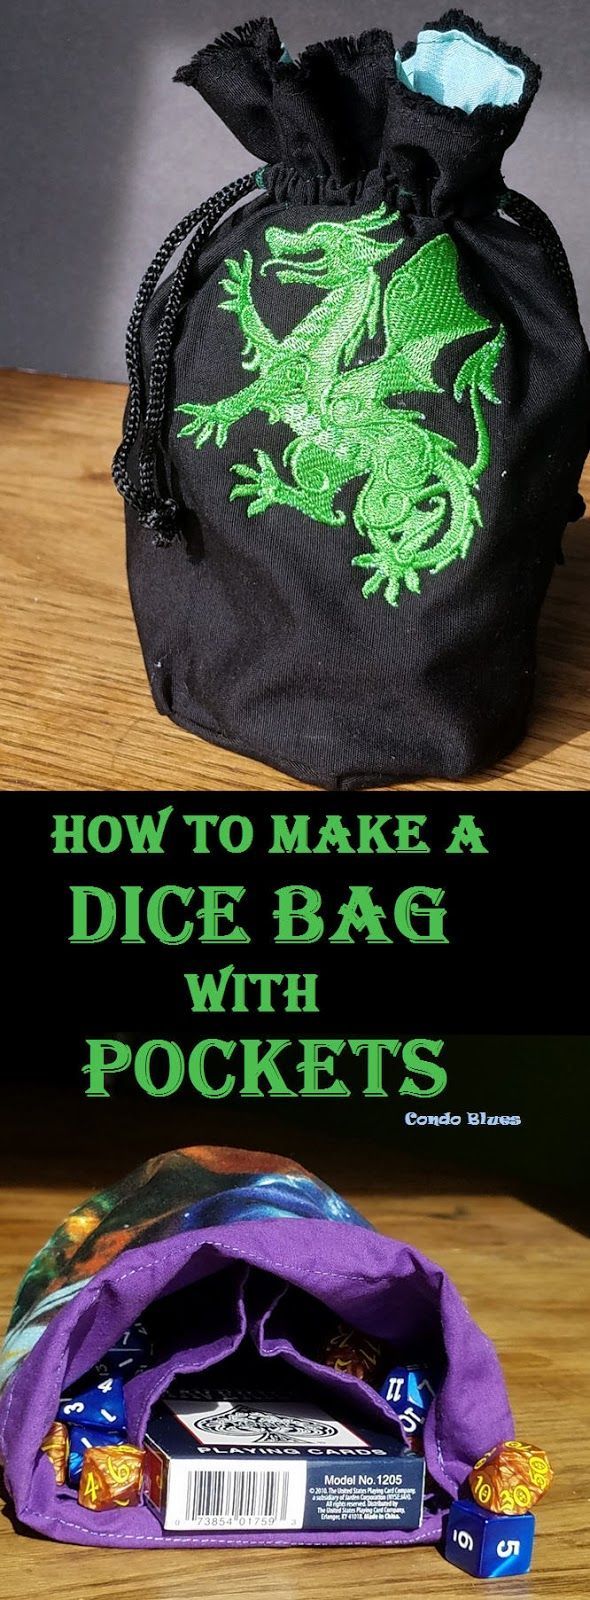 How to Make a Drawstring Dice Bag with Pockets -   16 DIY Clothes Step By Step fun ideas